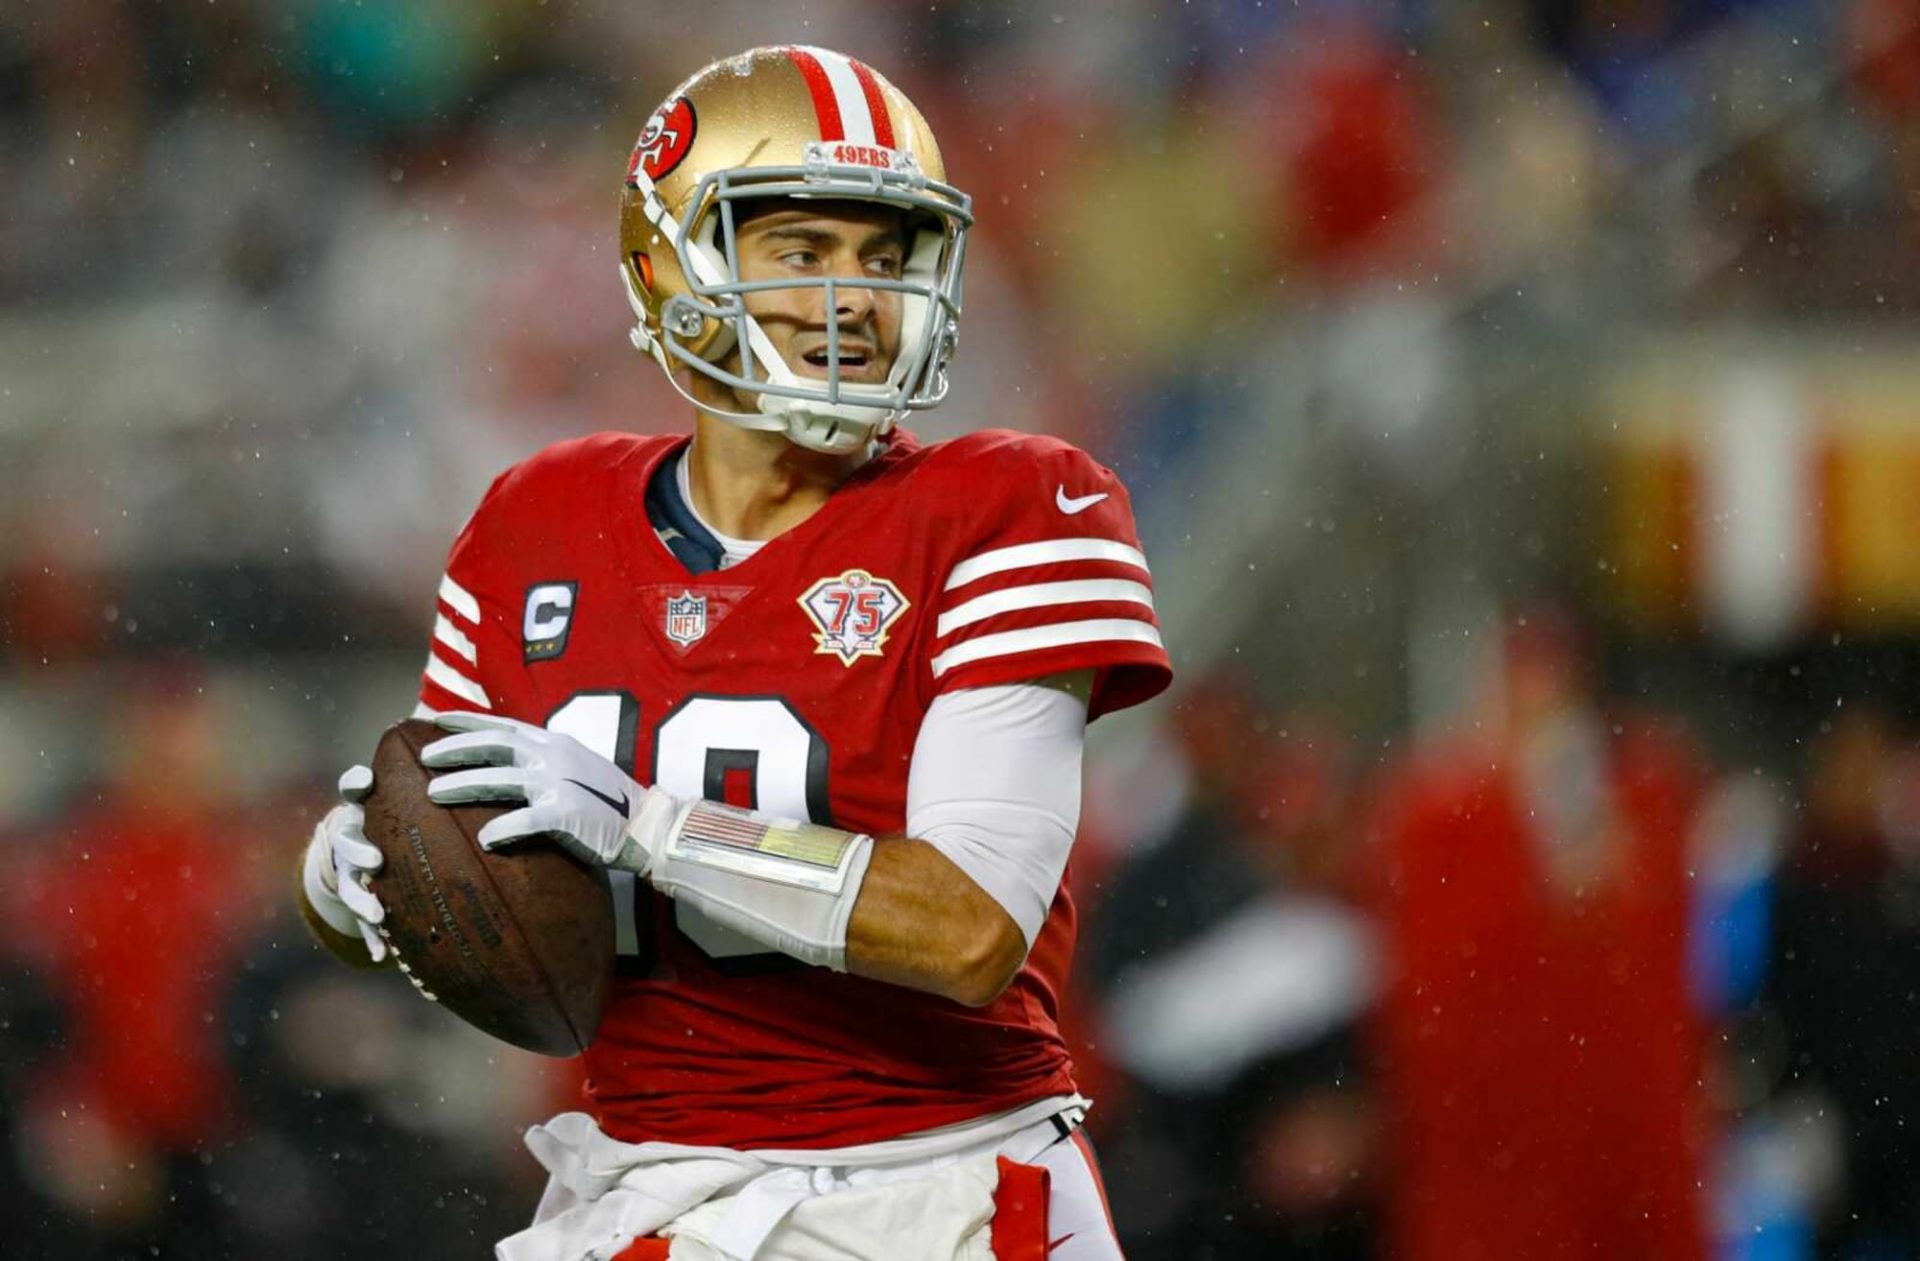 NFL Twitter wants Jimmy Garoppolo benched after 49ers loss